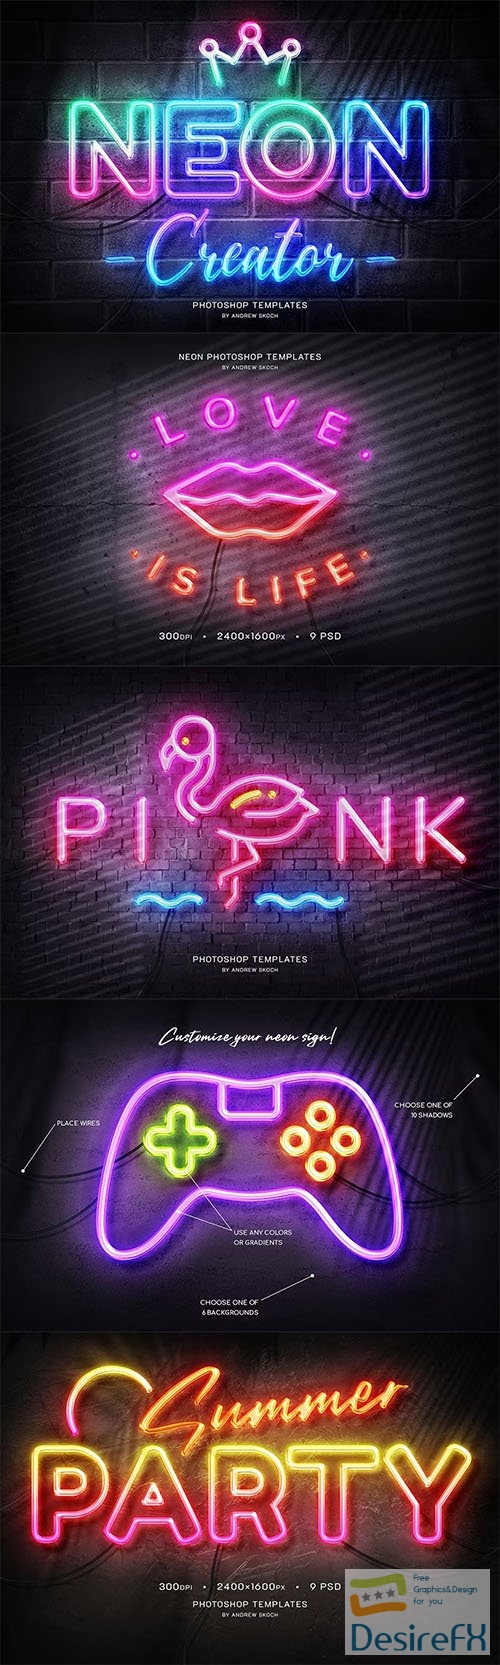 Neon Wall Sign Templates PSD